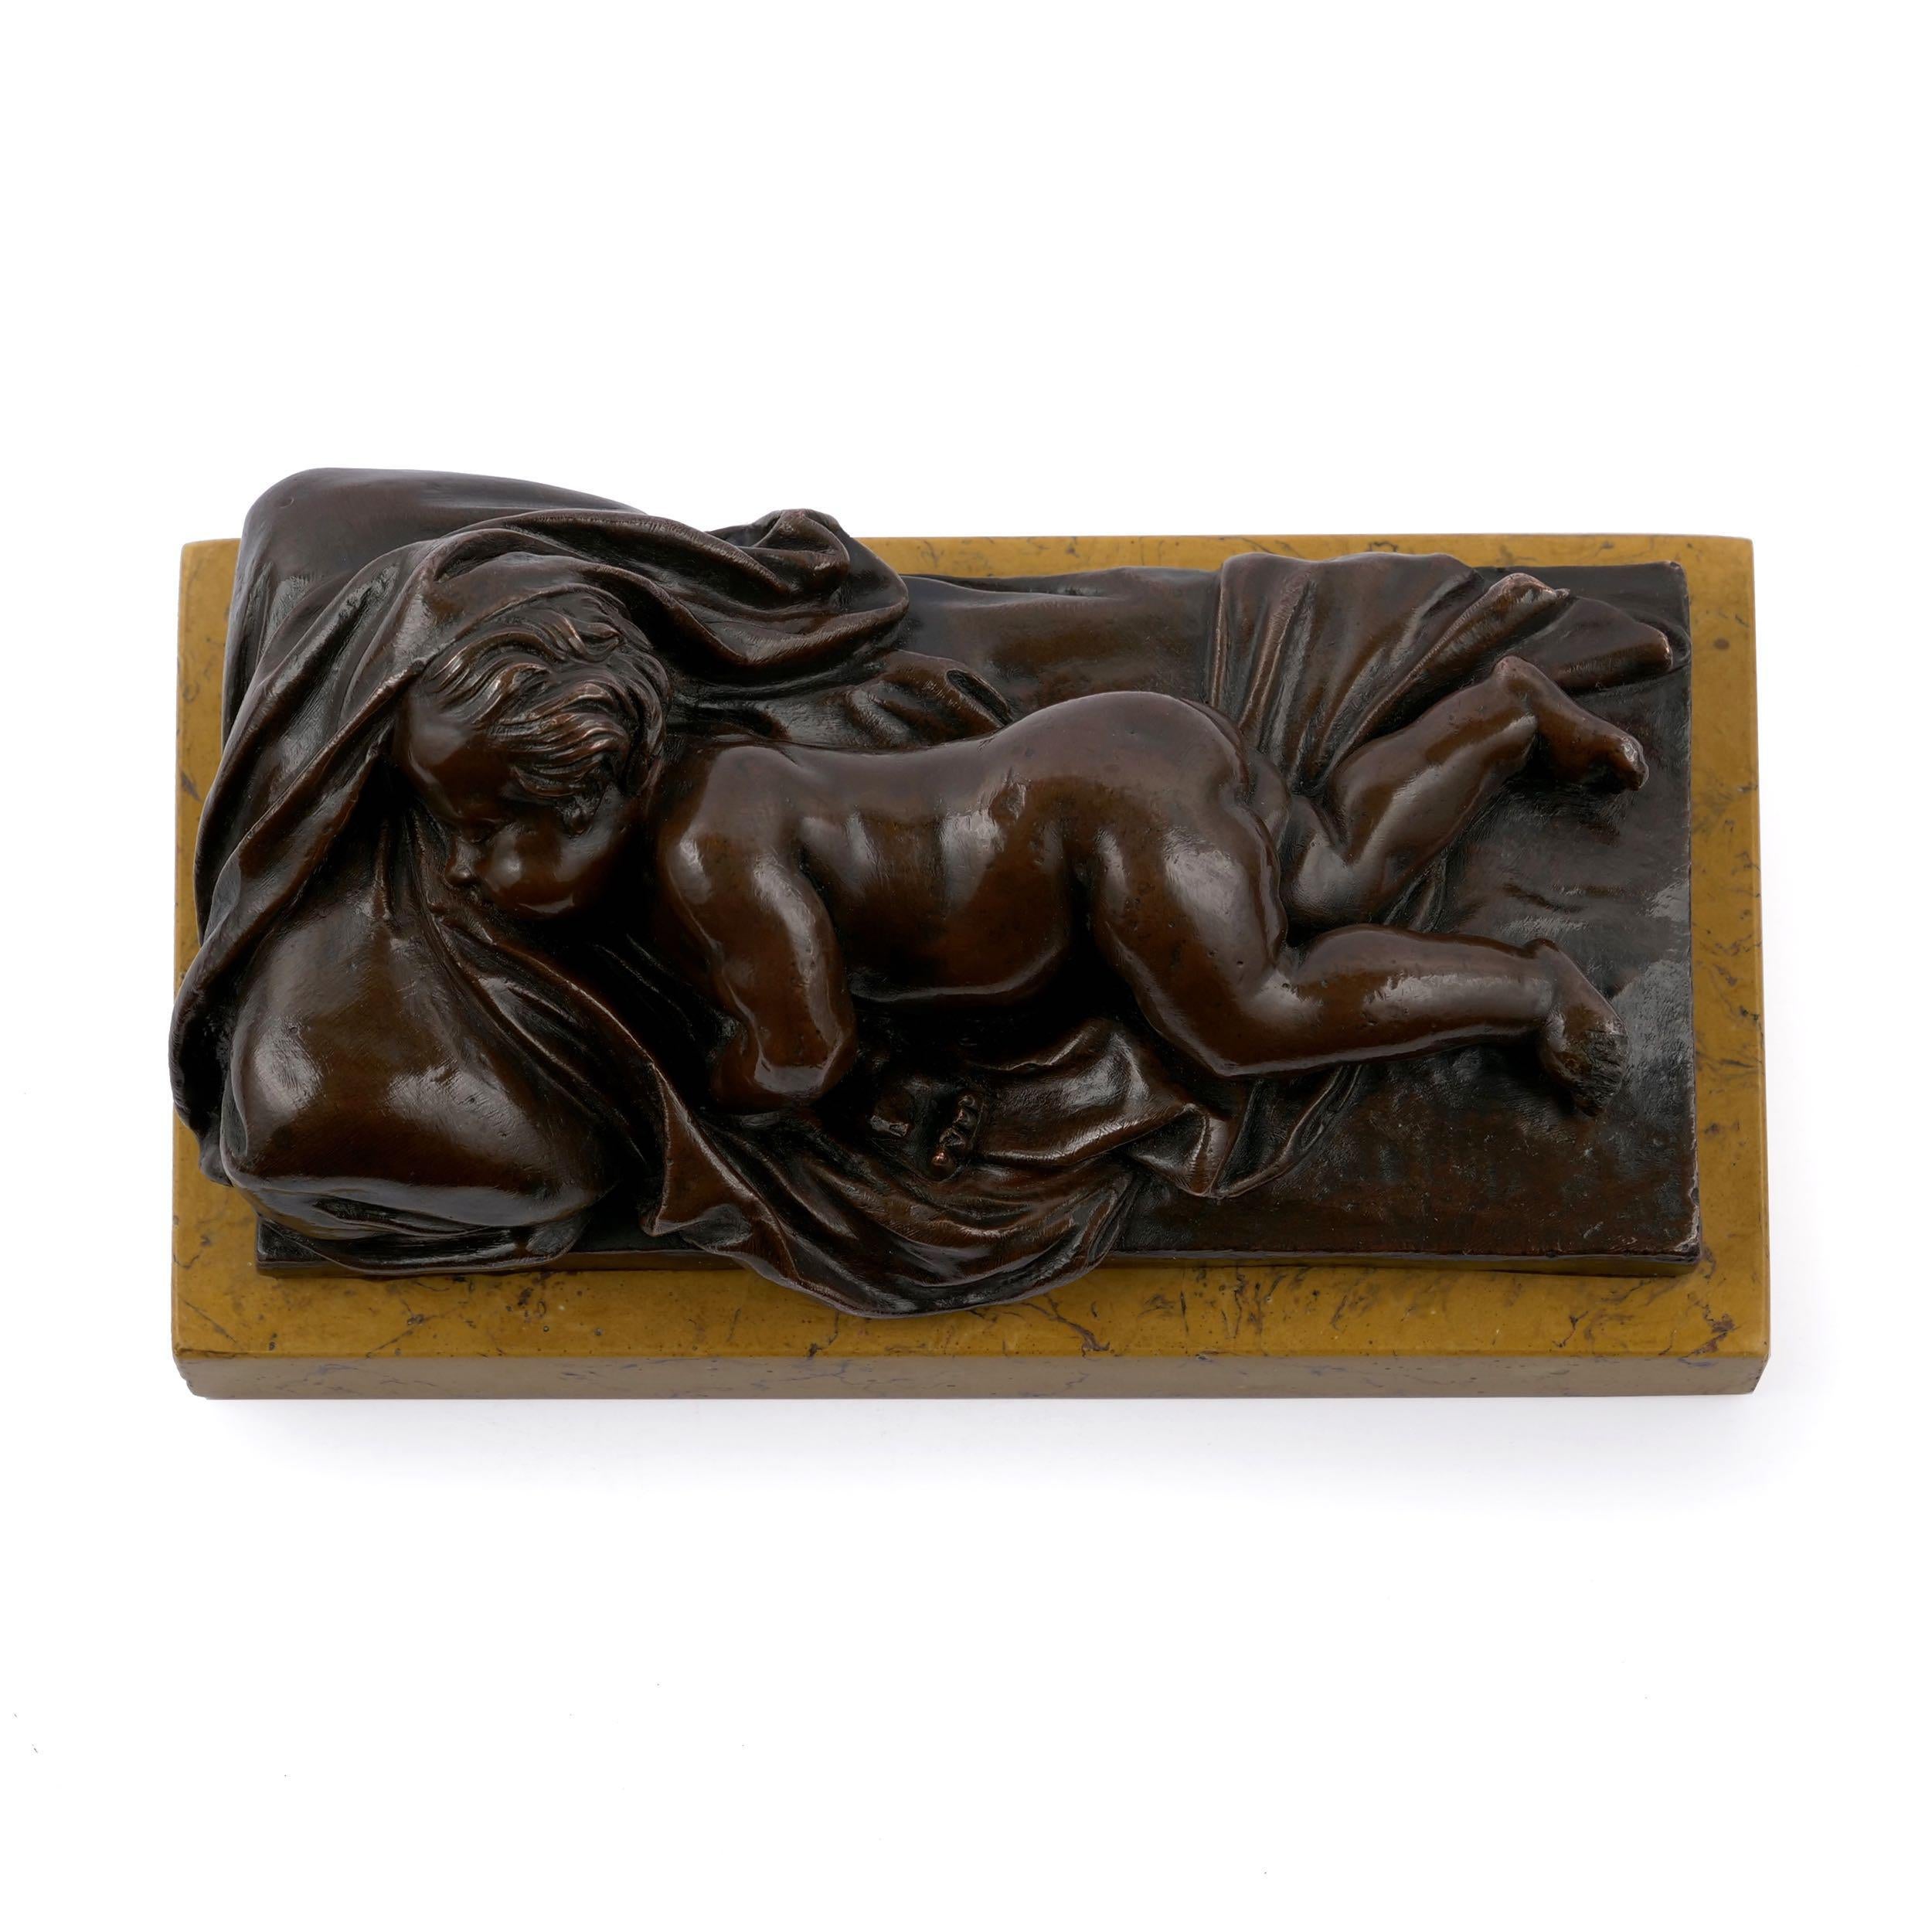 Antique Paperweight Sculpture of “Sleeping Putto” After François Duquesnoy In Good Condition For Sale In Shippensburg, PA